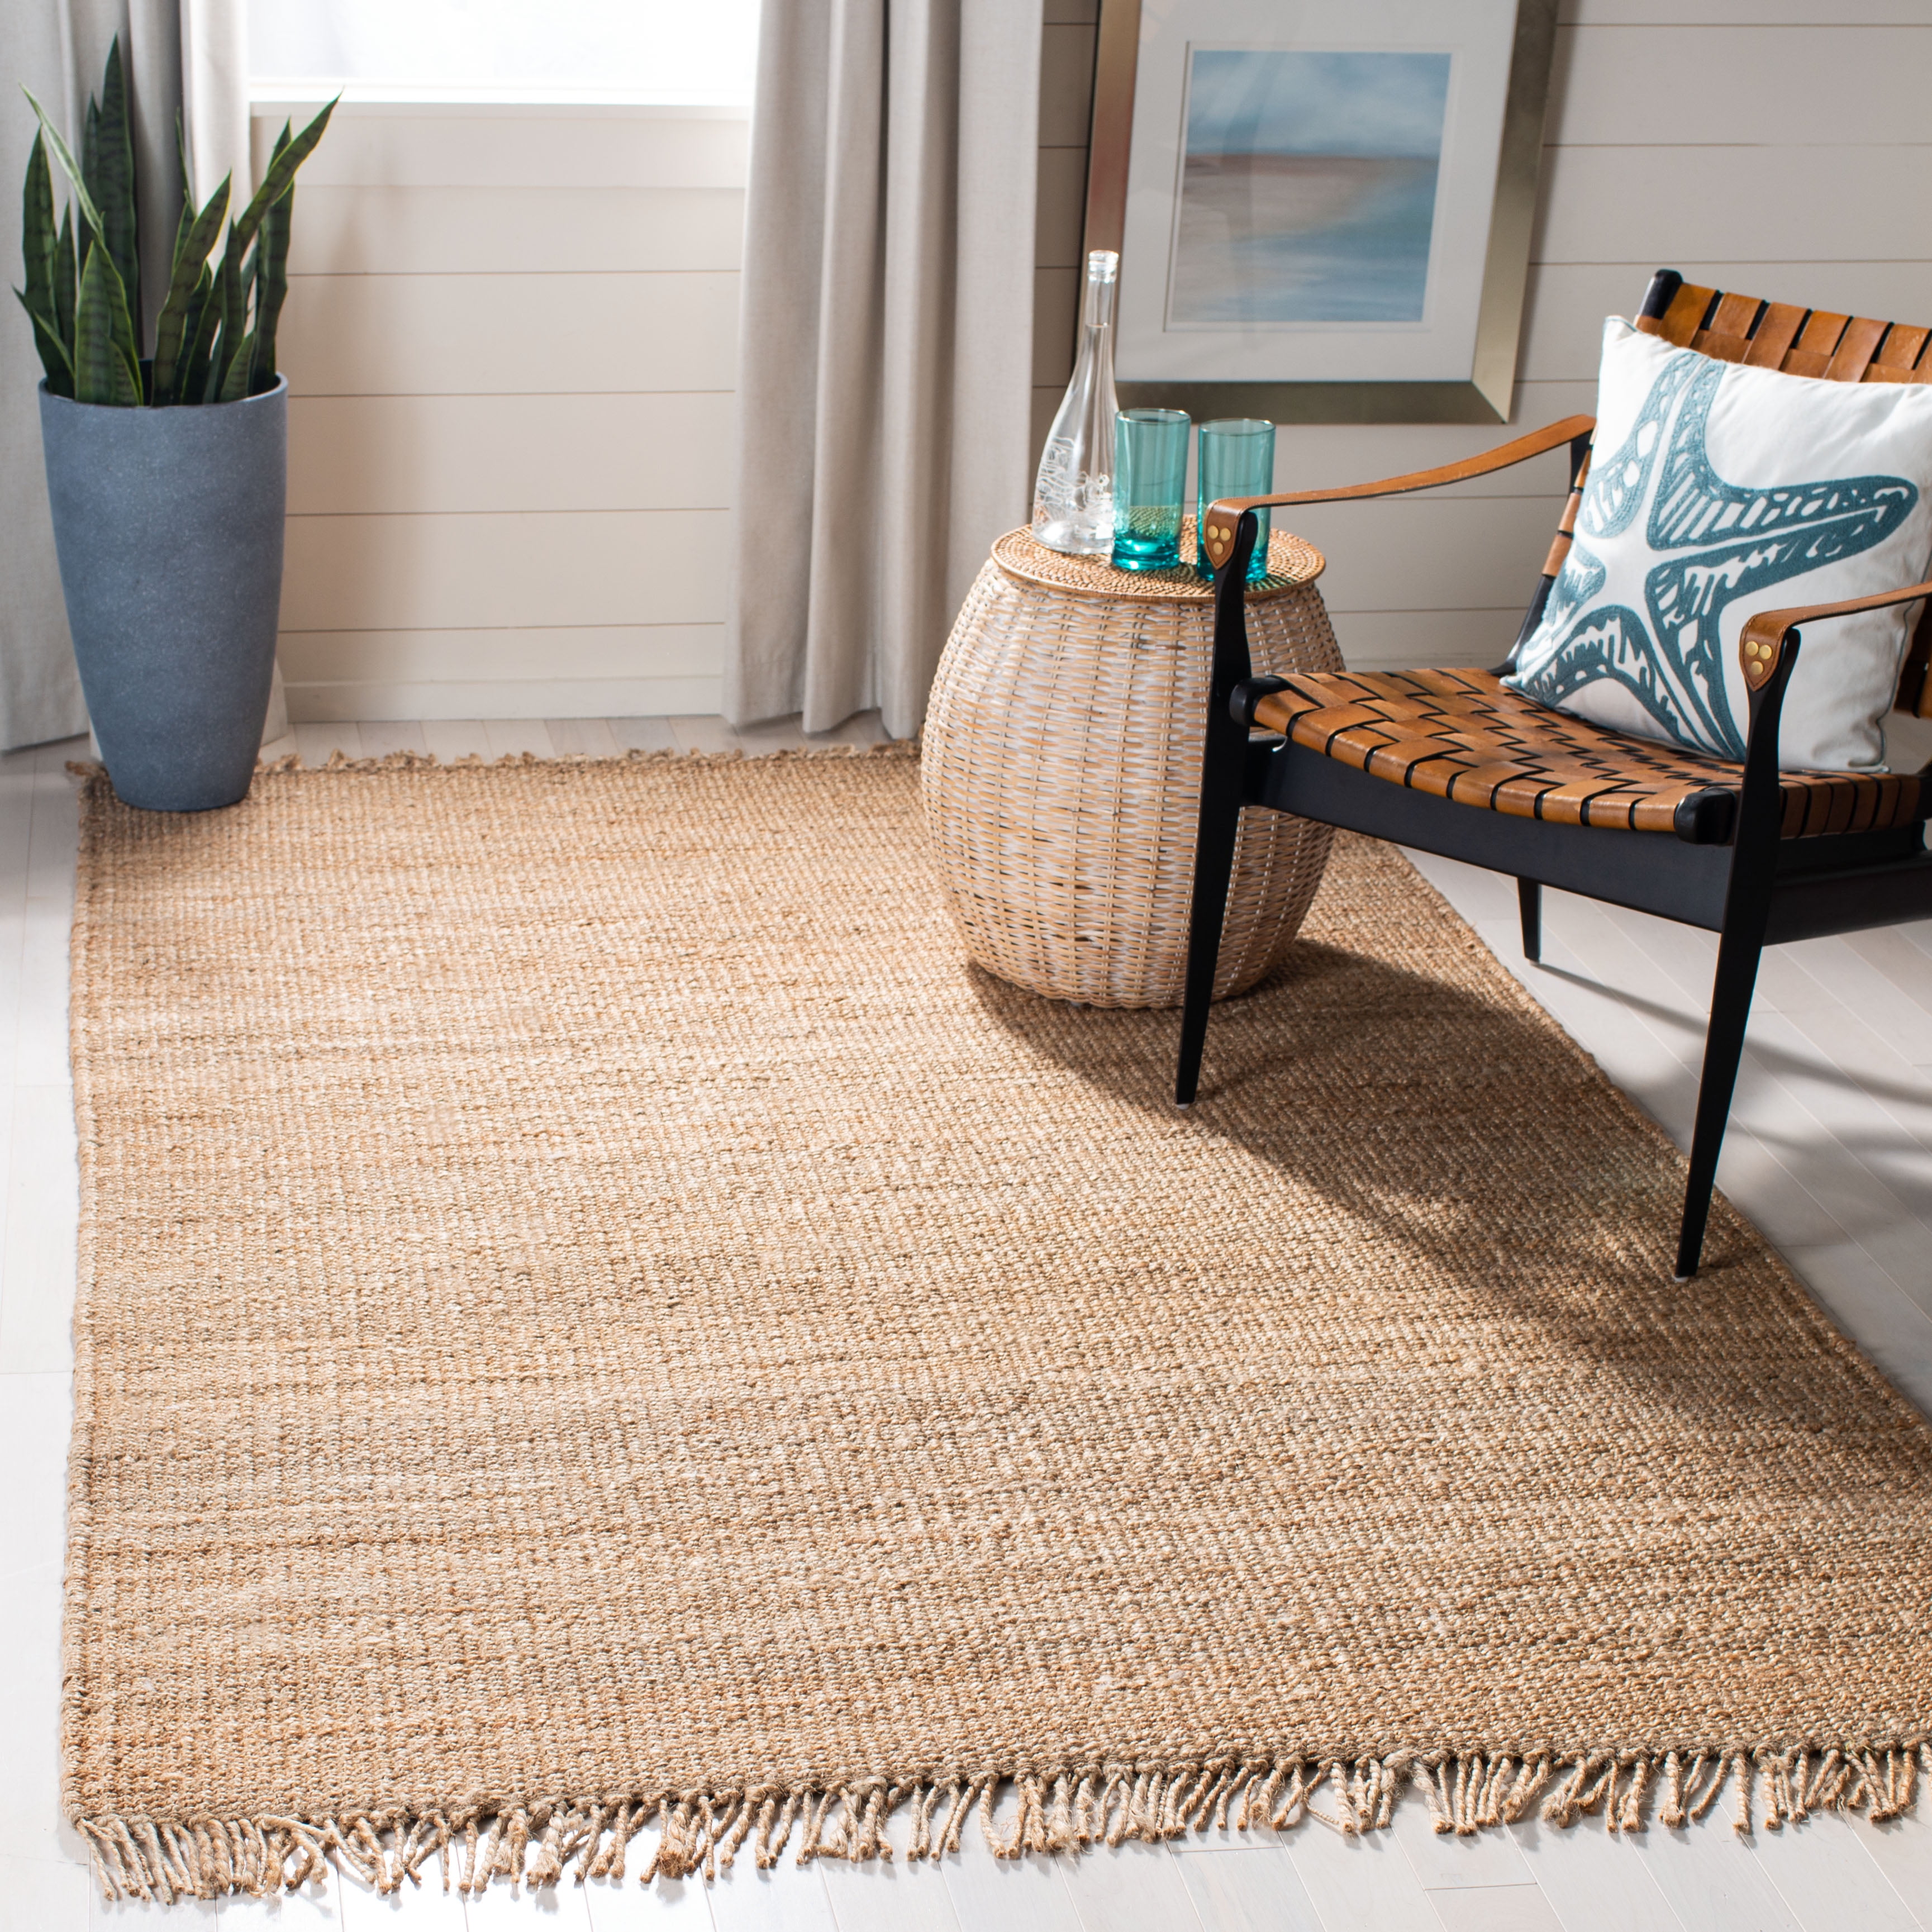 Braided Rugs for Sale - Braided Area Rugs of Great Quality